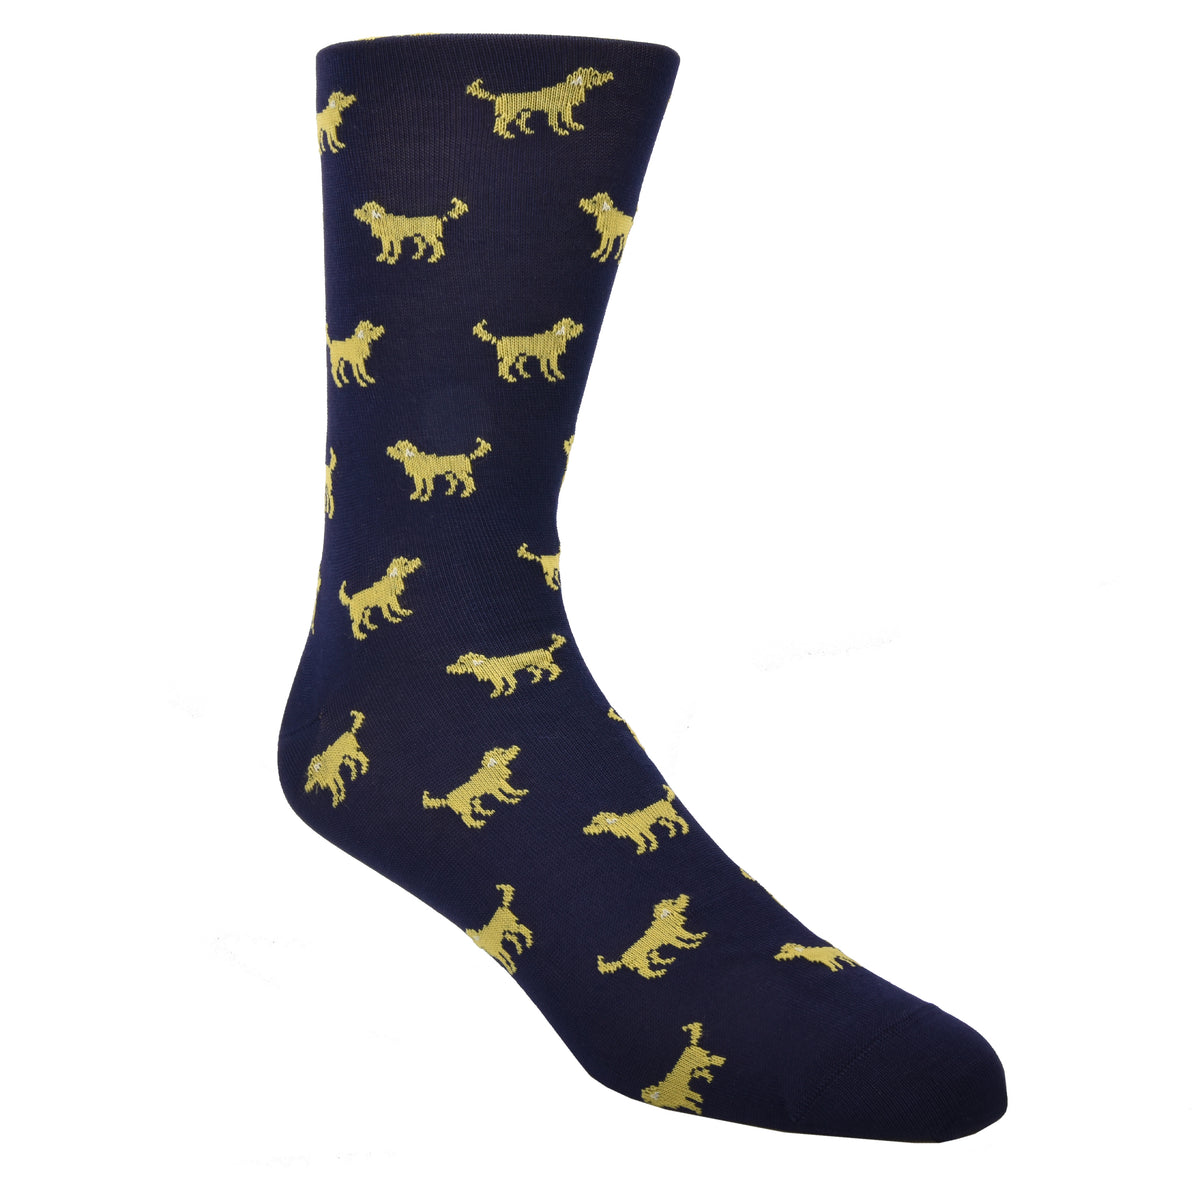 An homage to man&#39;s best friend, perfect for your barking dogs. Life is too short to wear boring socks! #damnrightAn homage to man&#39;s best friend, perfect for your barking dogs. Life is too short to wear boring socks! #damnright  70% Mercerized Cotton 29% Nylon 1% Spandex Fits Size 8-12 Machine Washable Made in the USA